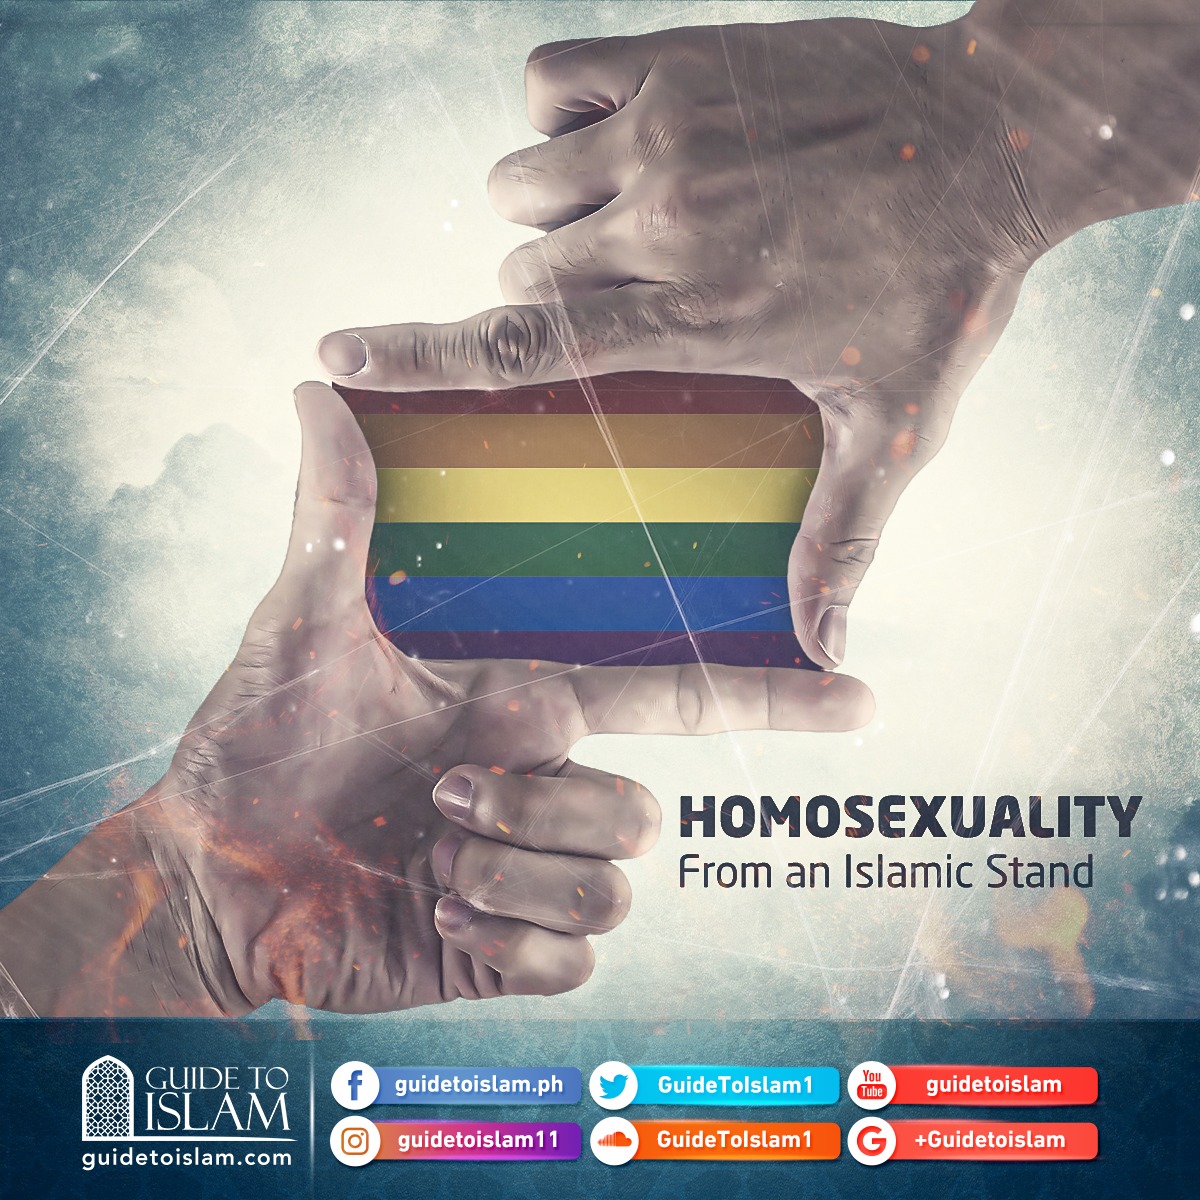 Homosexuality… From an Islamic Stand